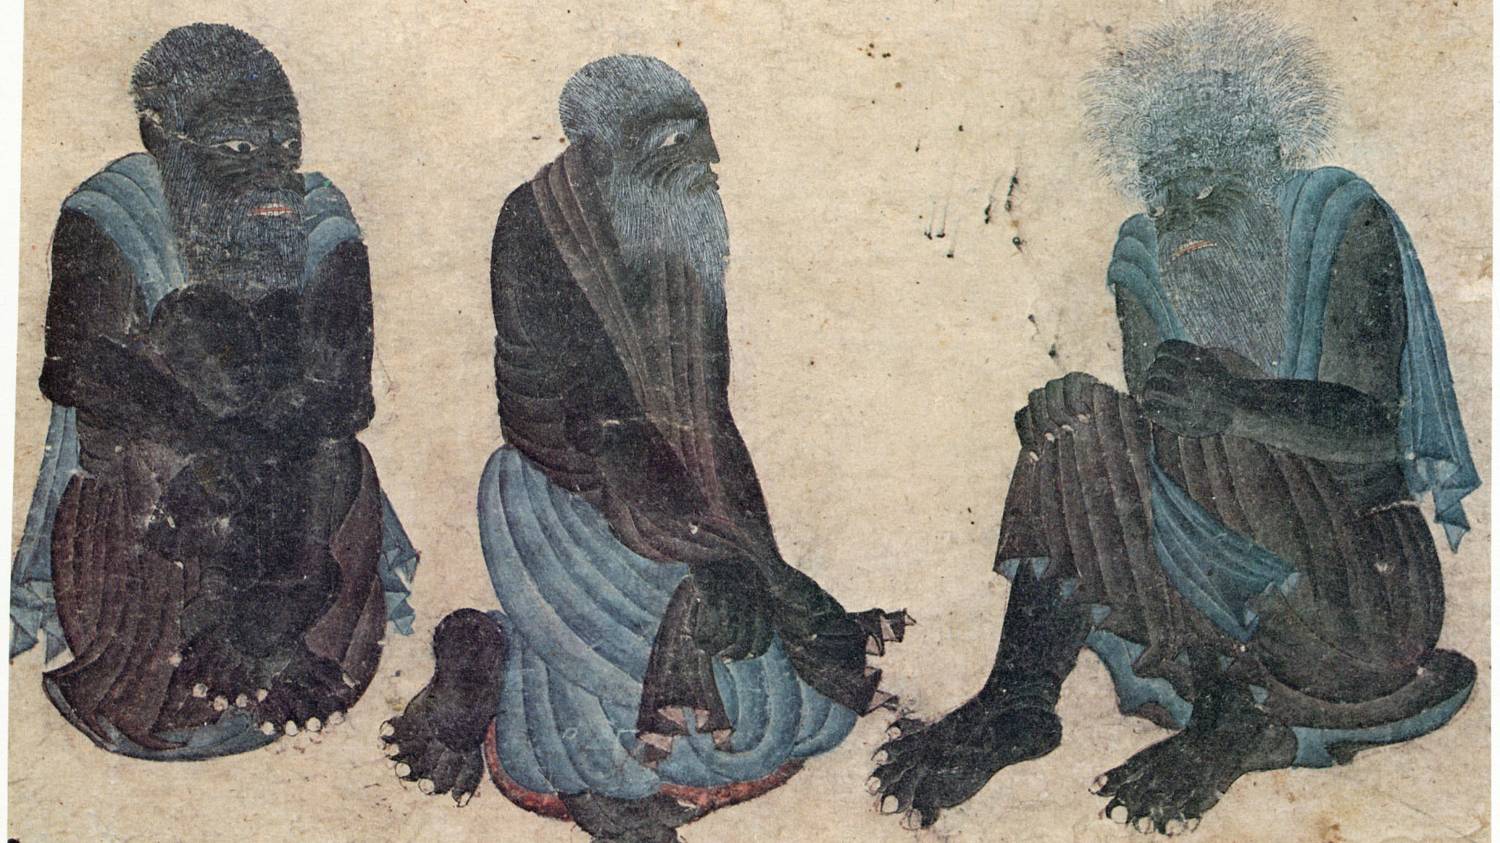 The unseen jinn are said to have existed before humankind, their images often depicted as frightful beings (Siyah Kalem, Topkapi Palace Museum Library, Public Domain)